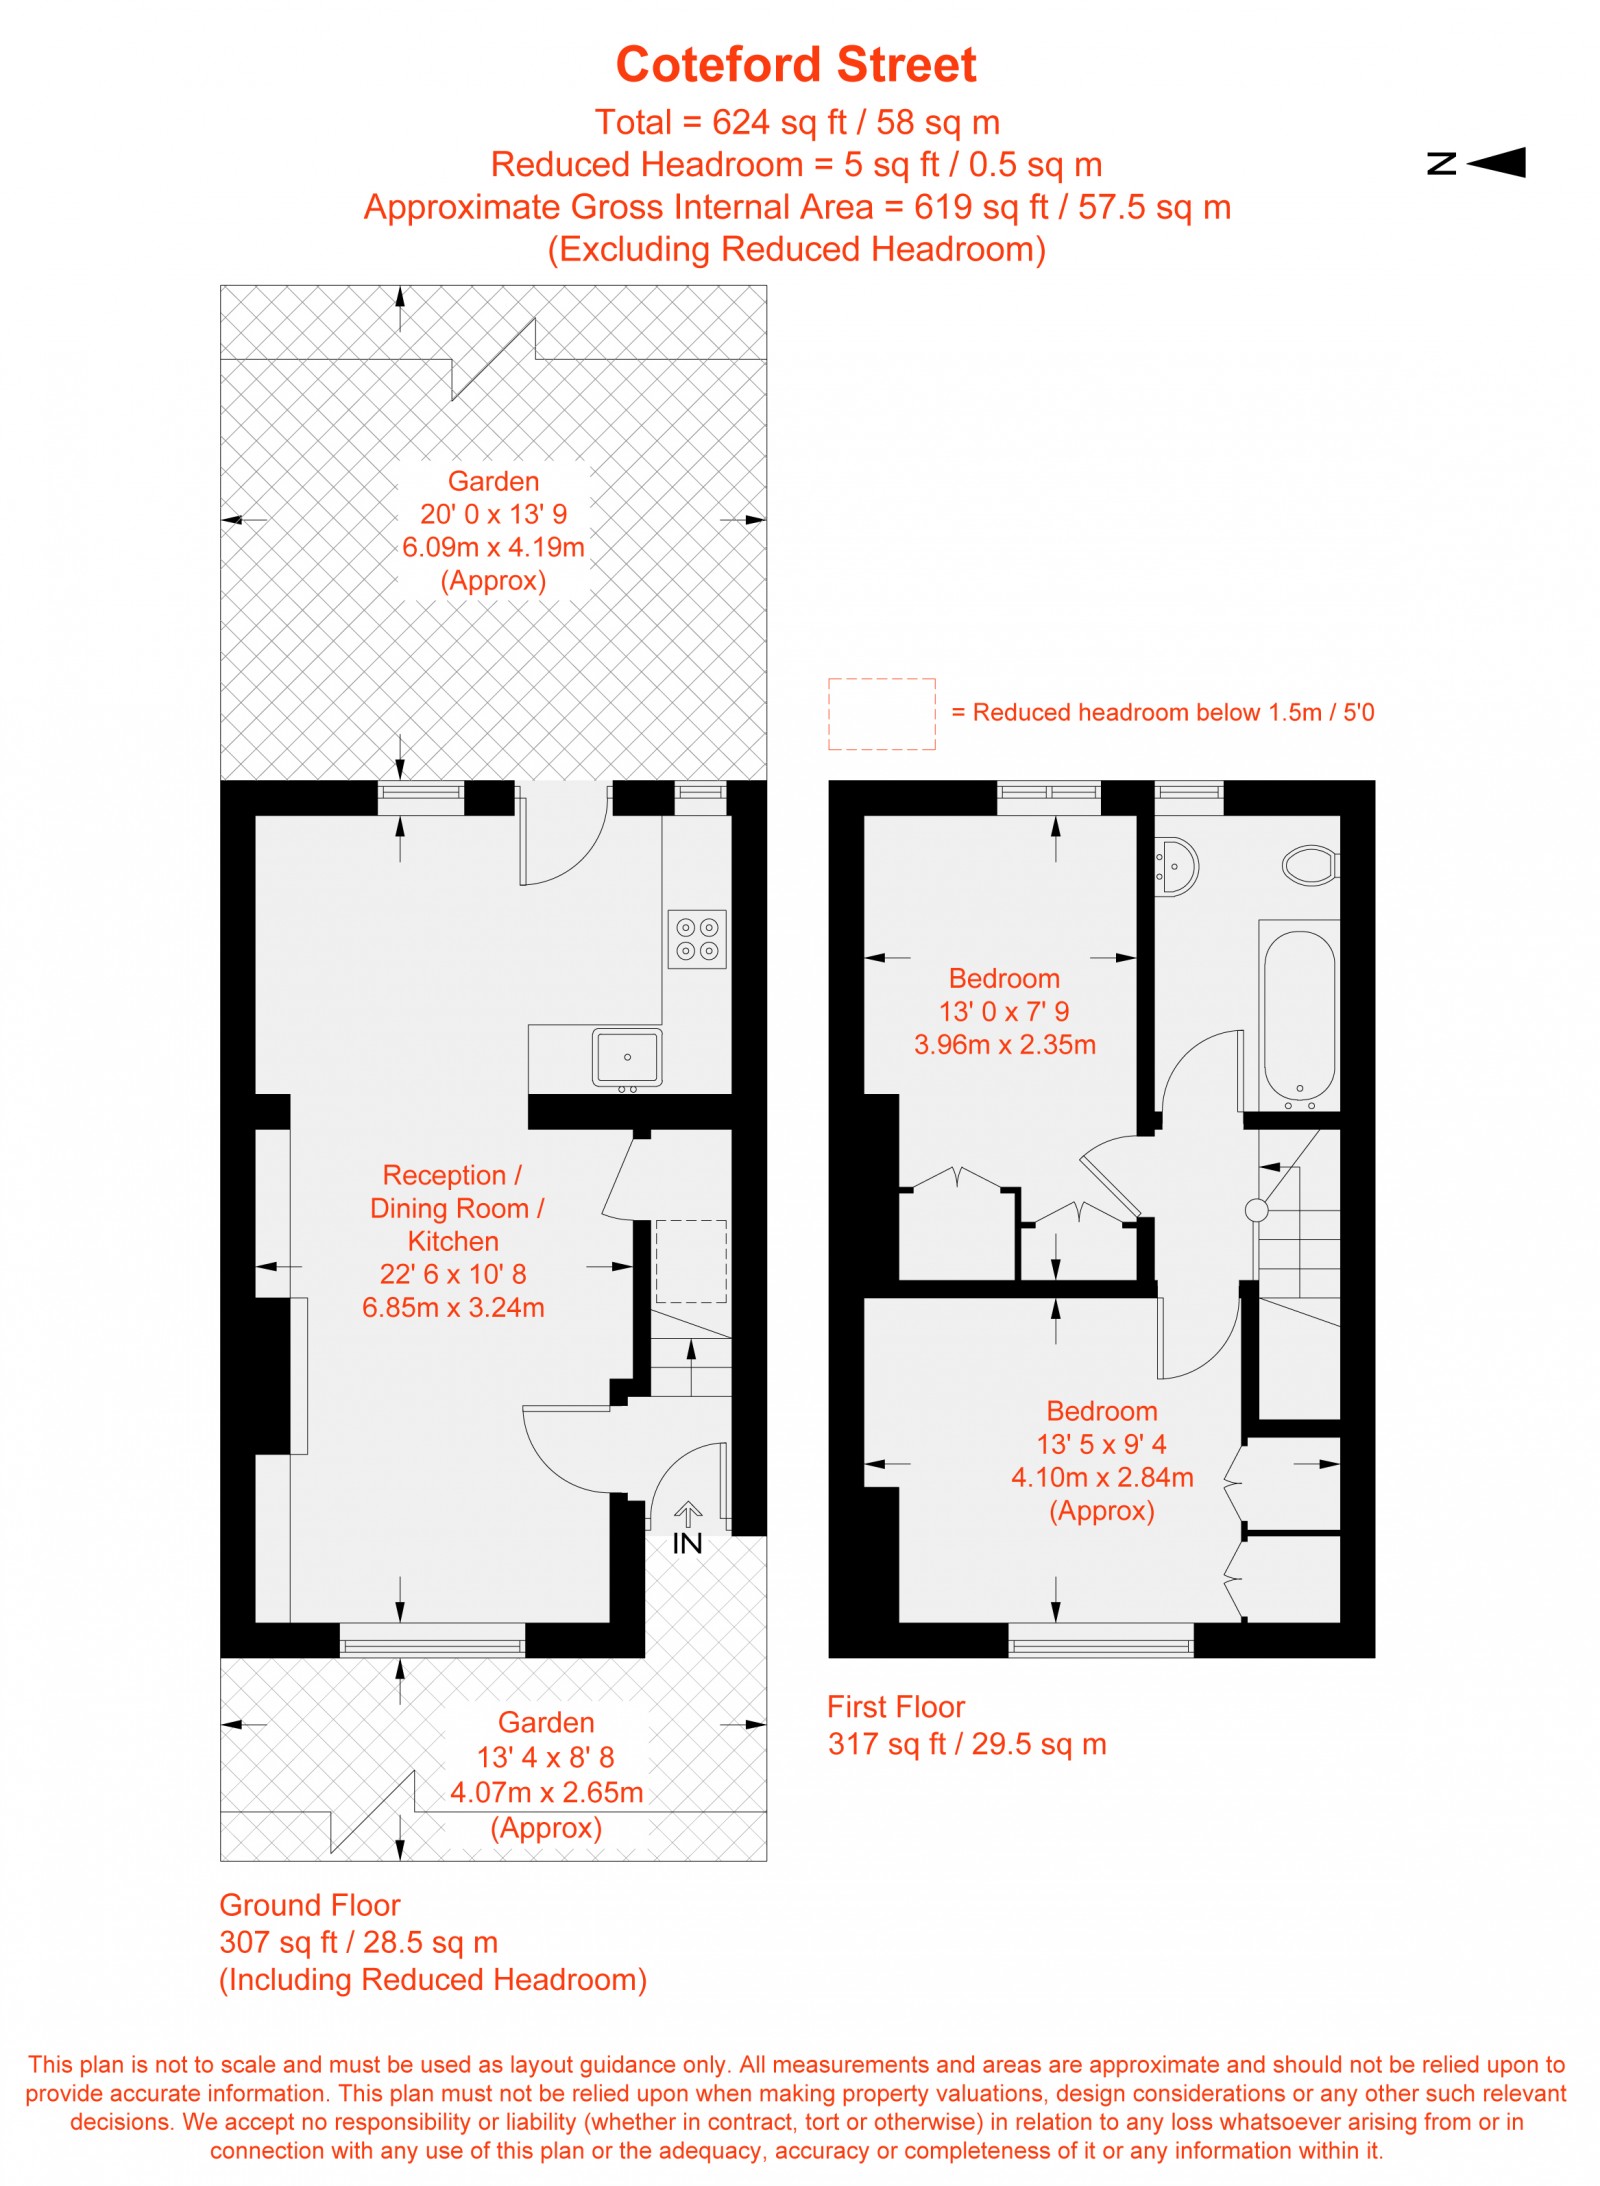 Floorplan for Coteford Street, Tooting, SW17